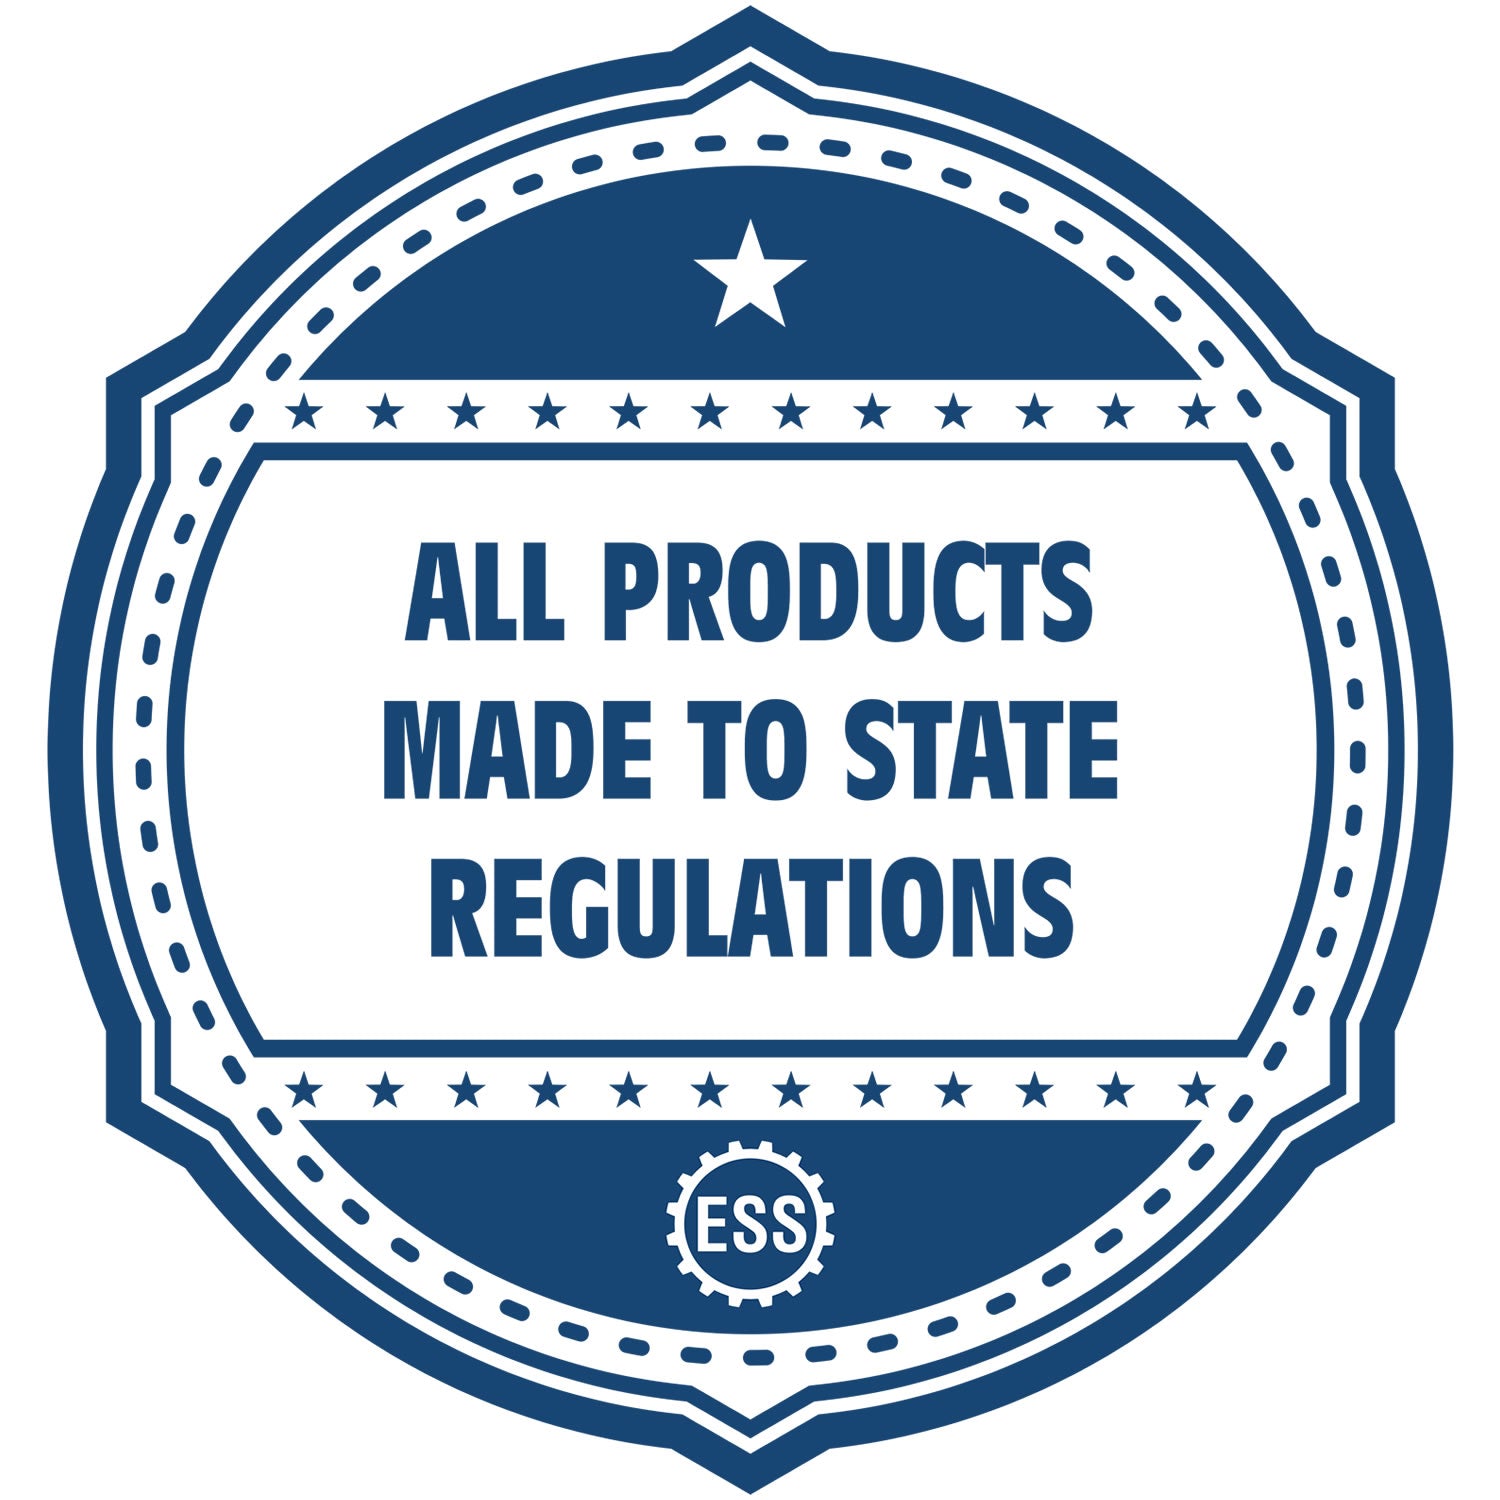 An icon or badge element for the New York Desk Surveyor Seal Embosser showing that this product is made in compliance with state regulations.